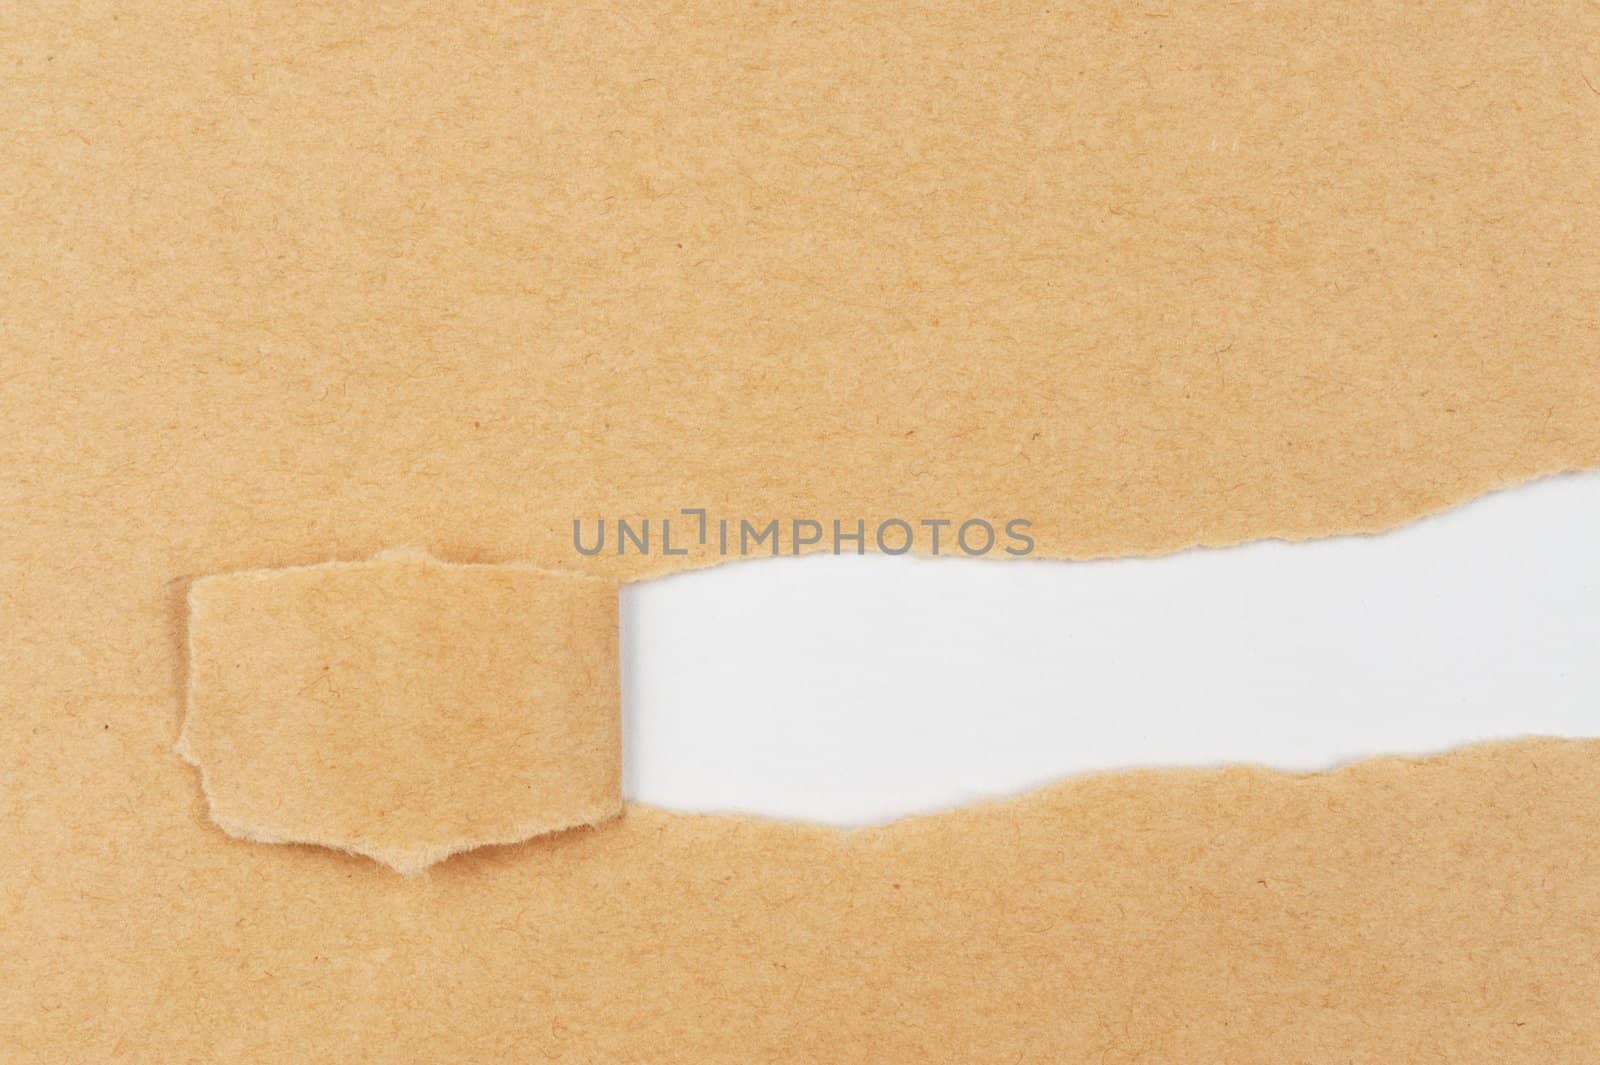 Torn yellow paper revealing white paper behind it